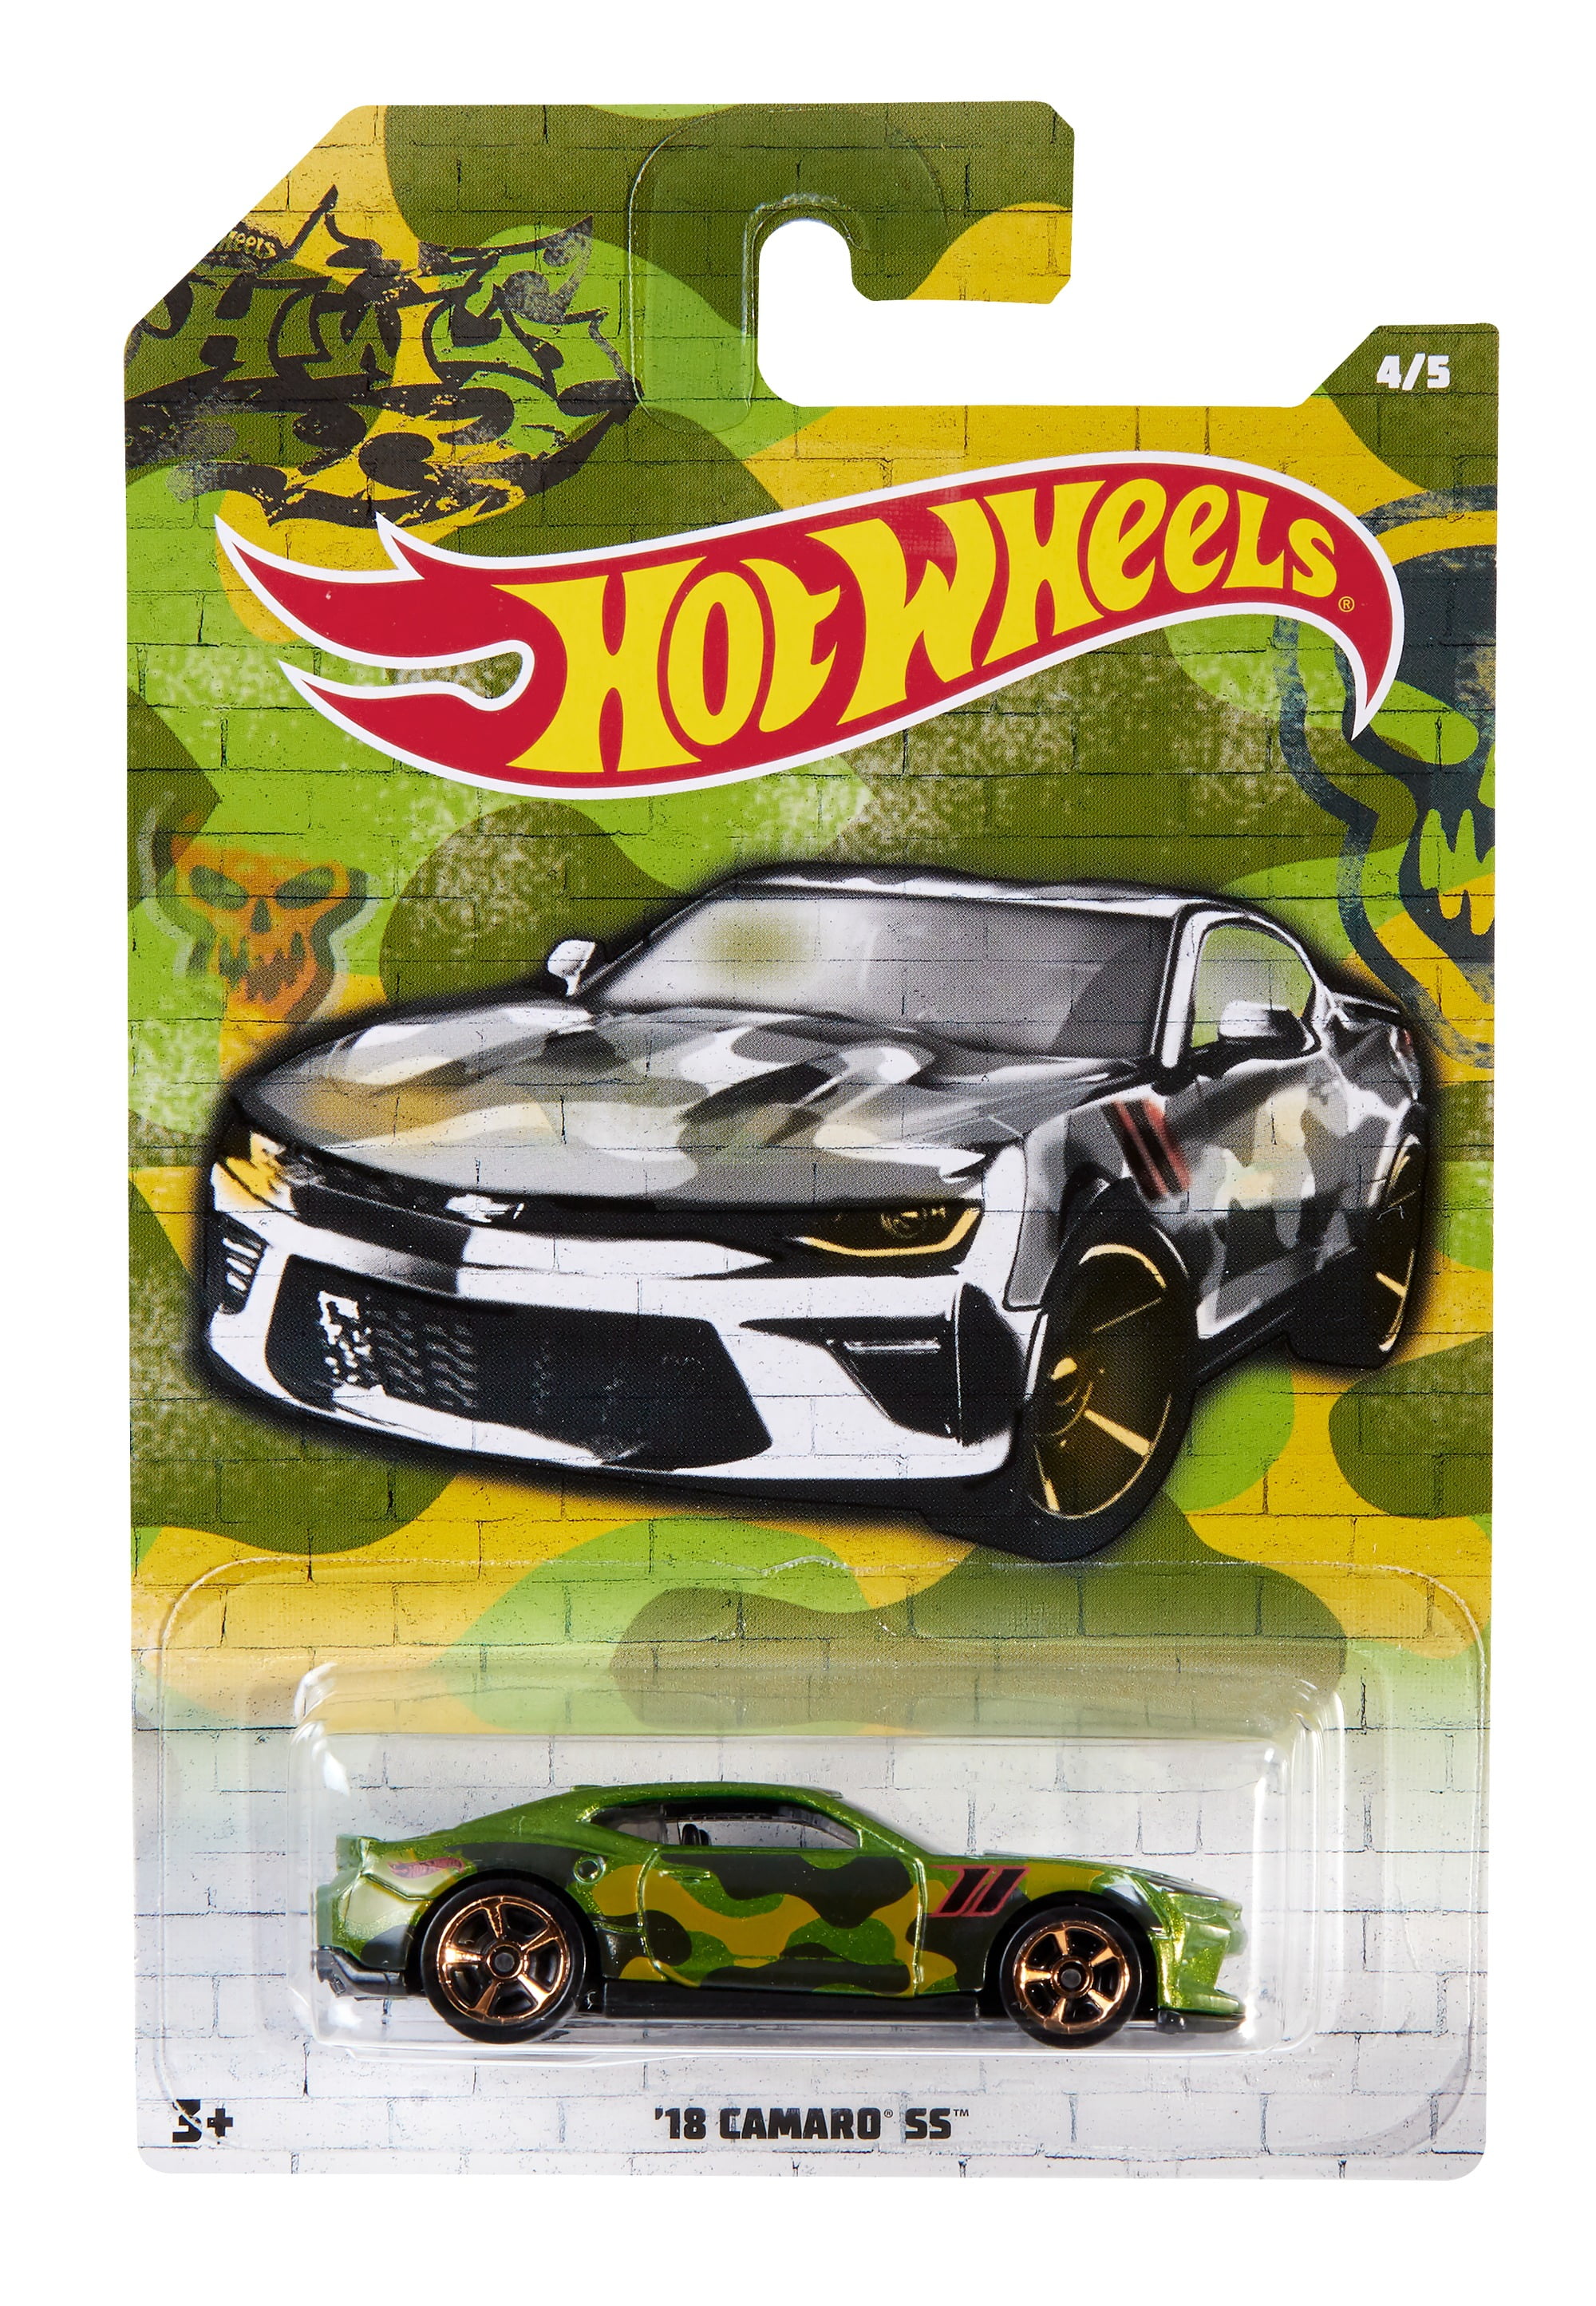 5 Details about   Hot Wheels 2020 camouflage series camo 2018 18 camaro SS green #4 